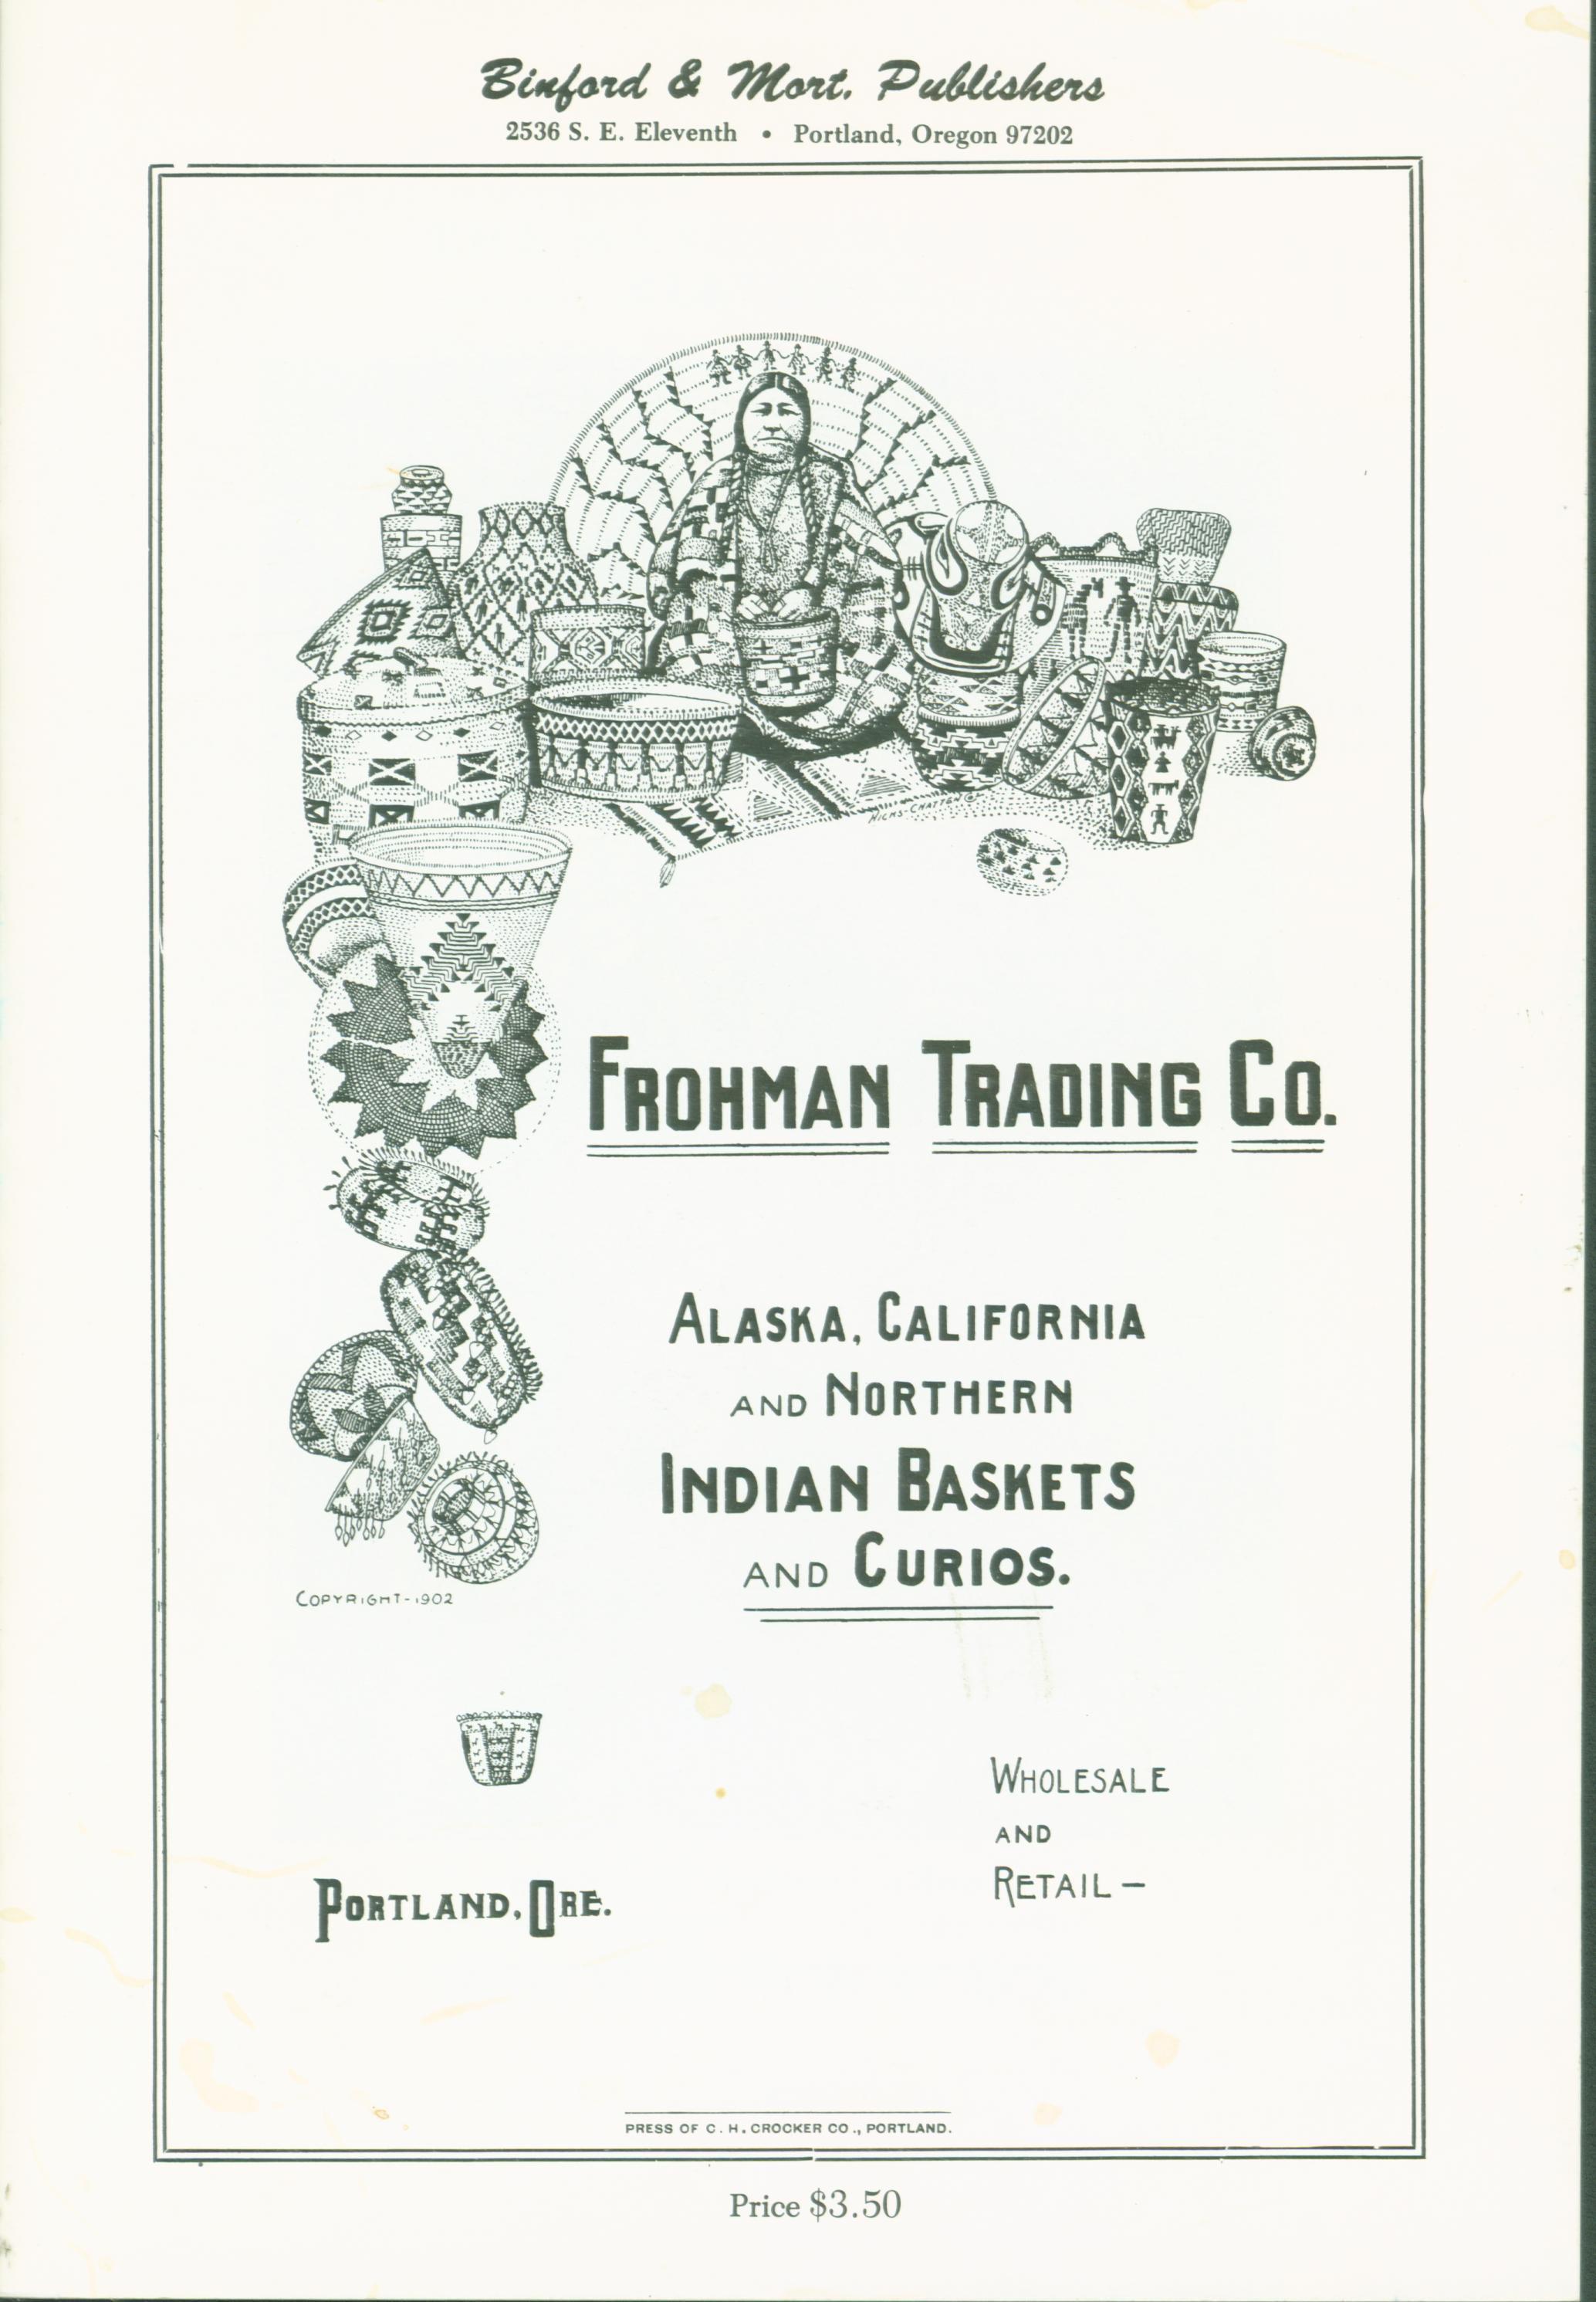 ALASKA, CALIFORNIA, AND NORTERN INDIAN BASKETS AND CURIOS. by Frohman Trading Co.